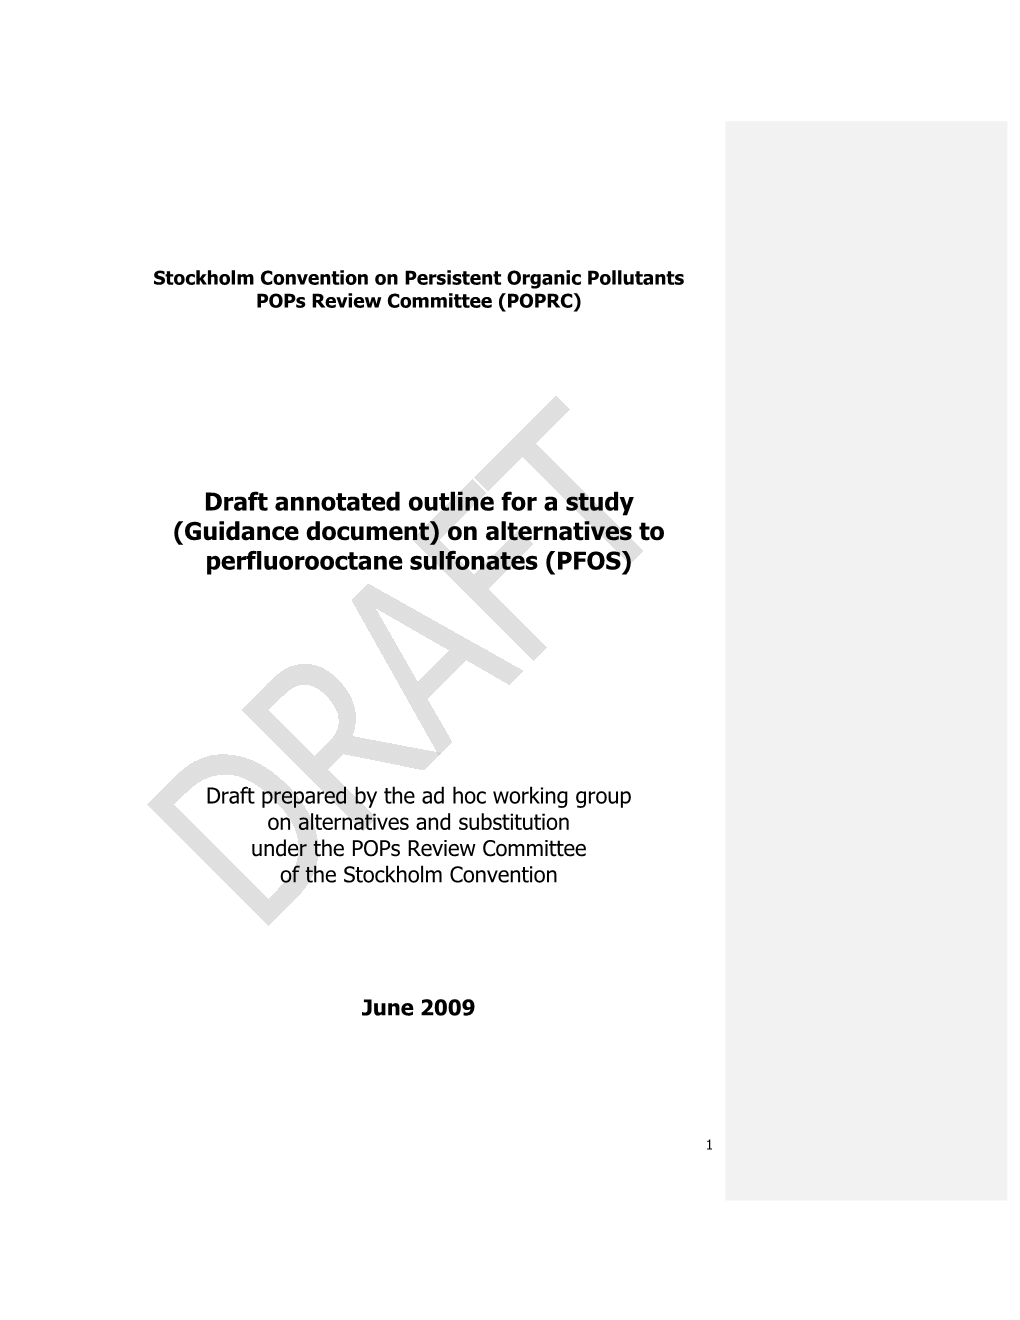 Draft Annotated Outline for a Study (Guidance Document) on Alternatives to Perfluorooctane Sulfonates (PFOS)